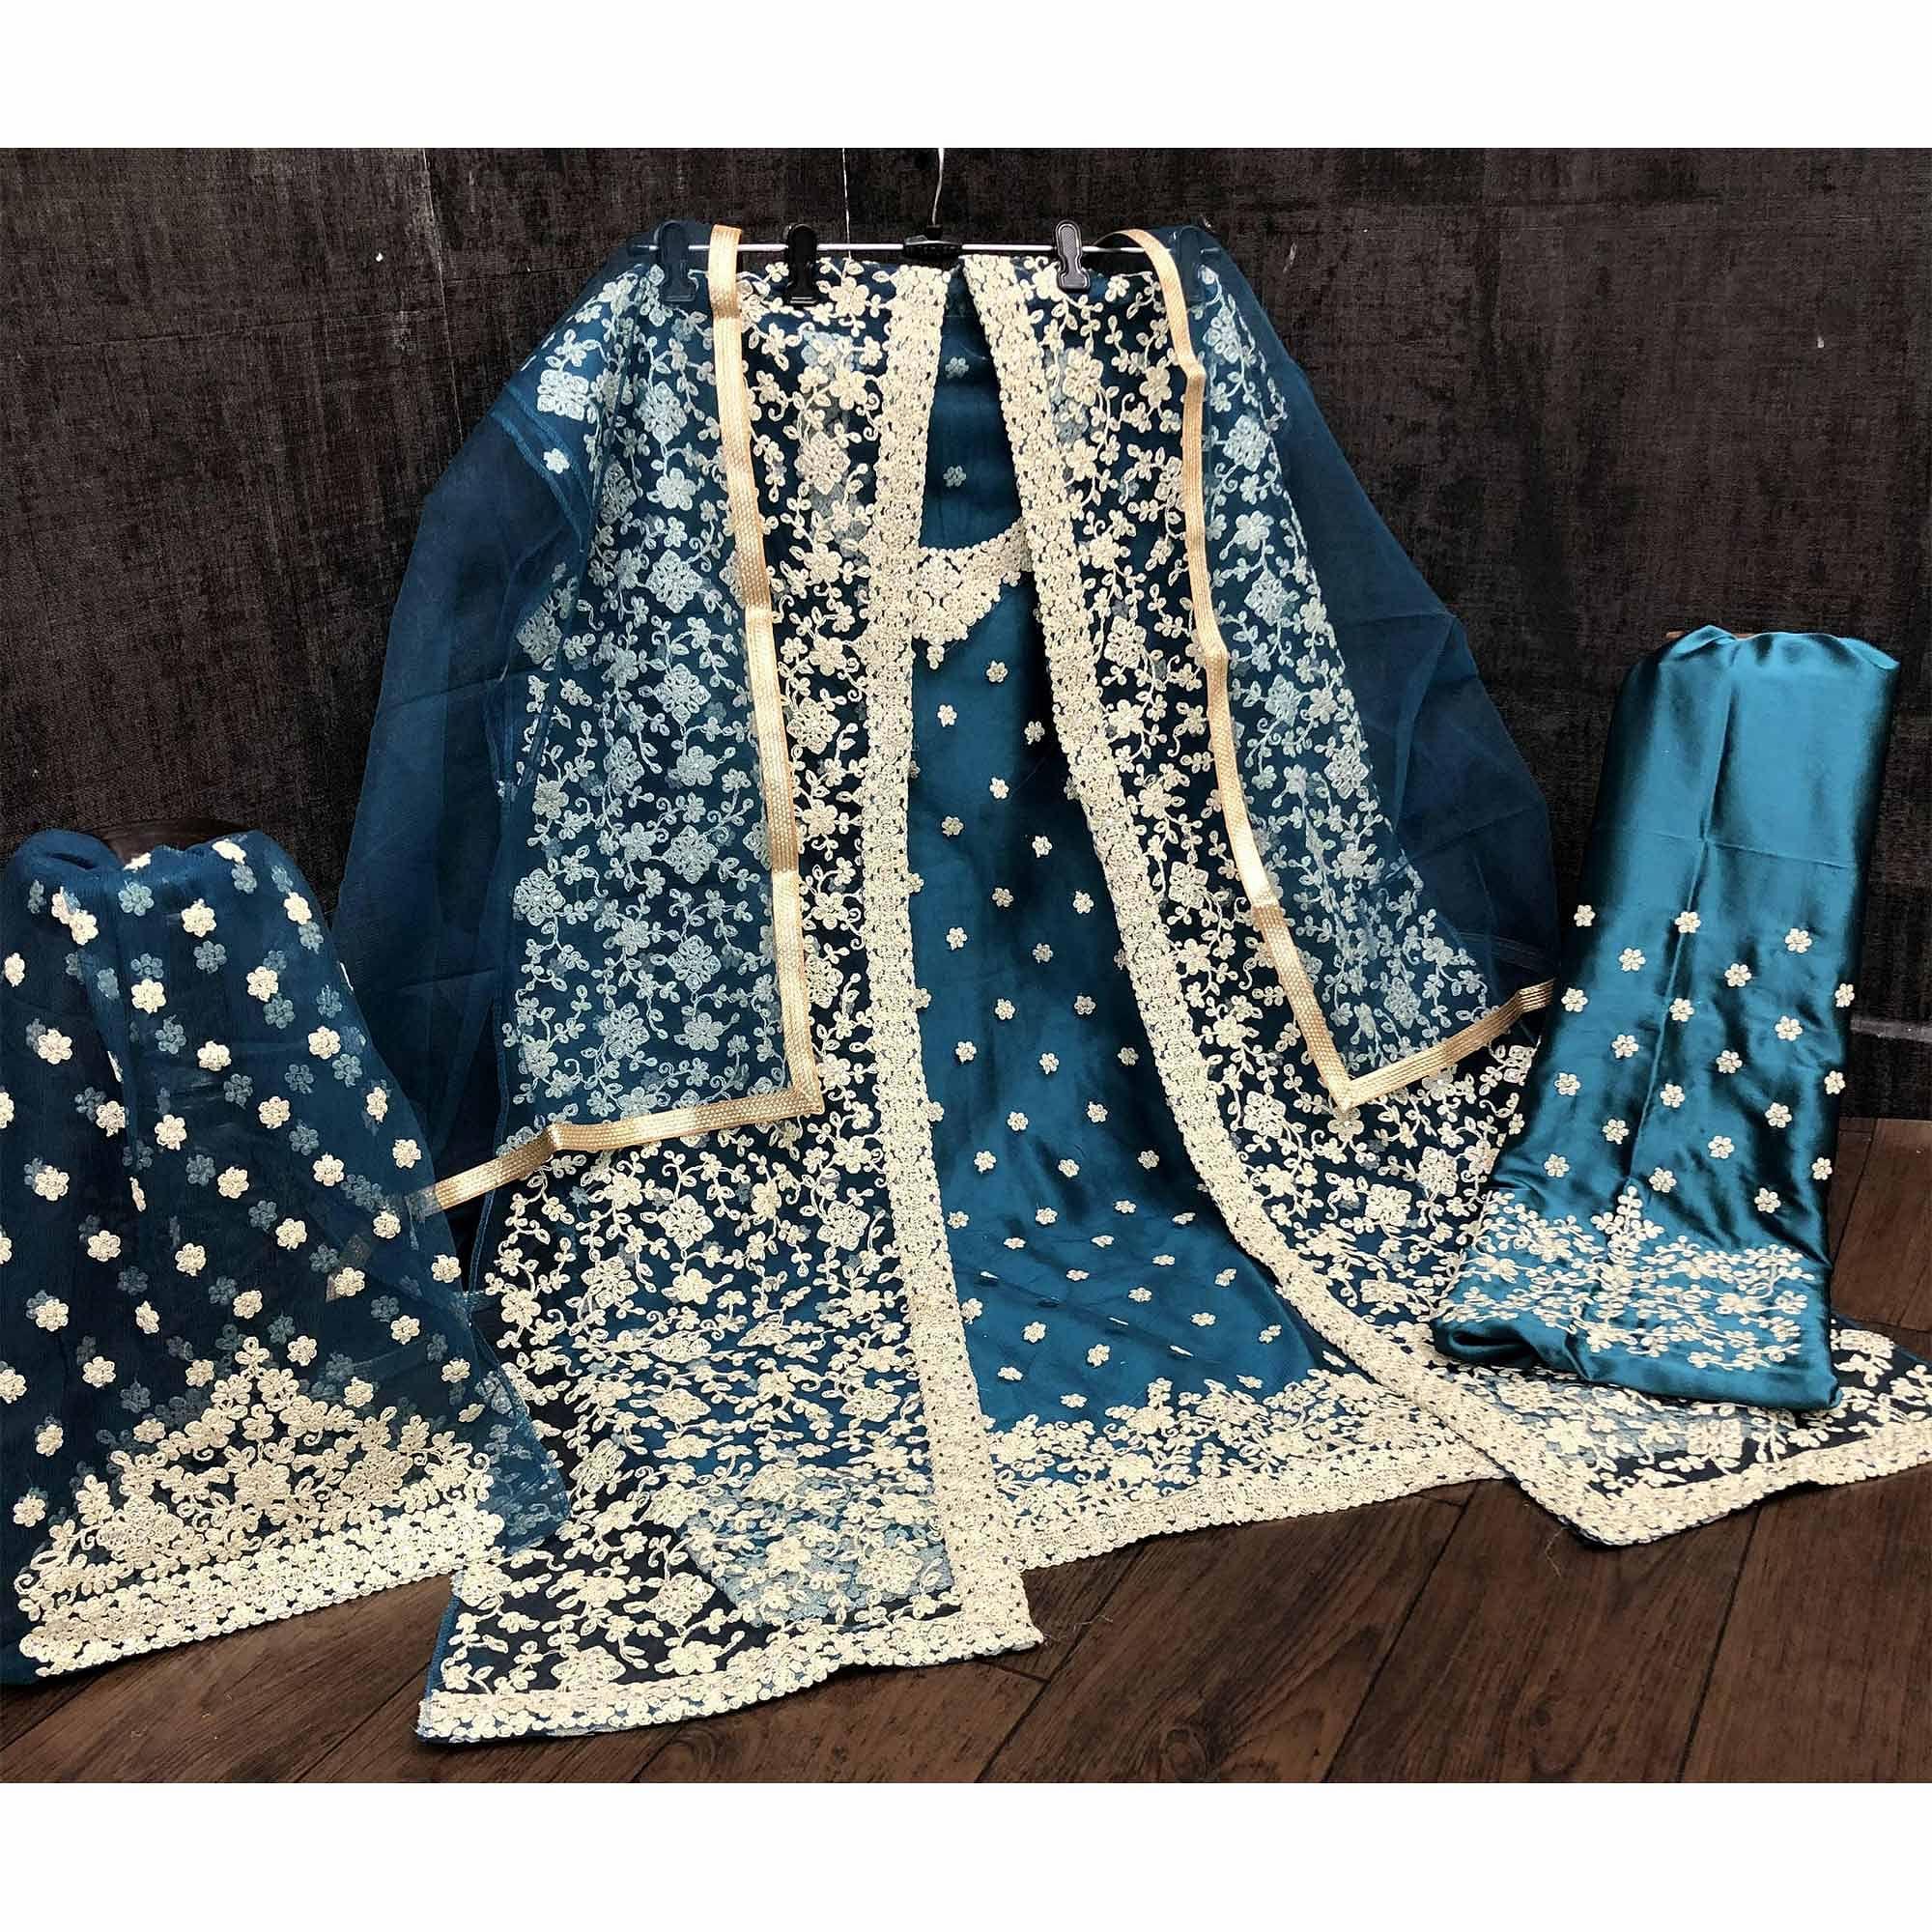 Hypnotic Aqua Blue Coloured Partywear Embroidered Butterfly Net Pakistani Straight Suit - Peachmode